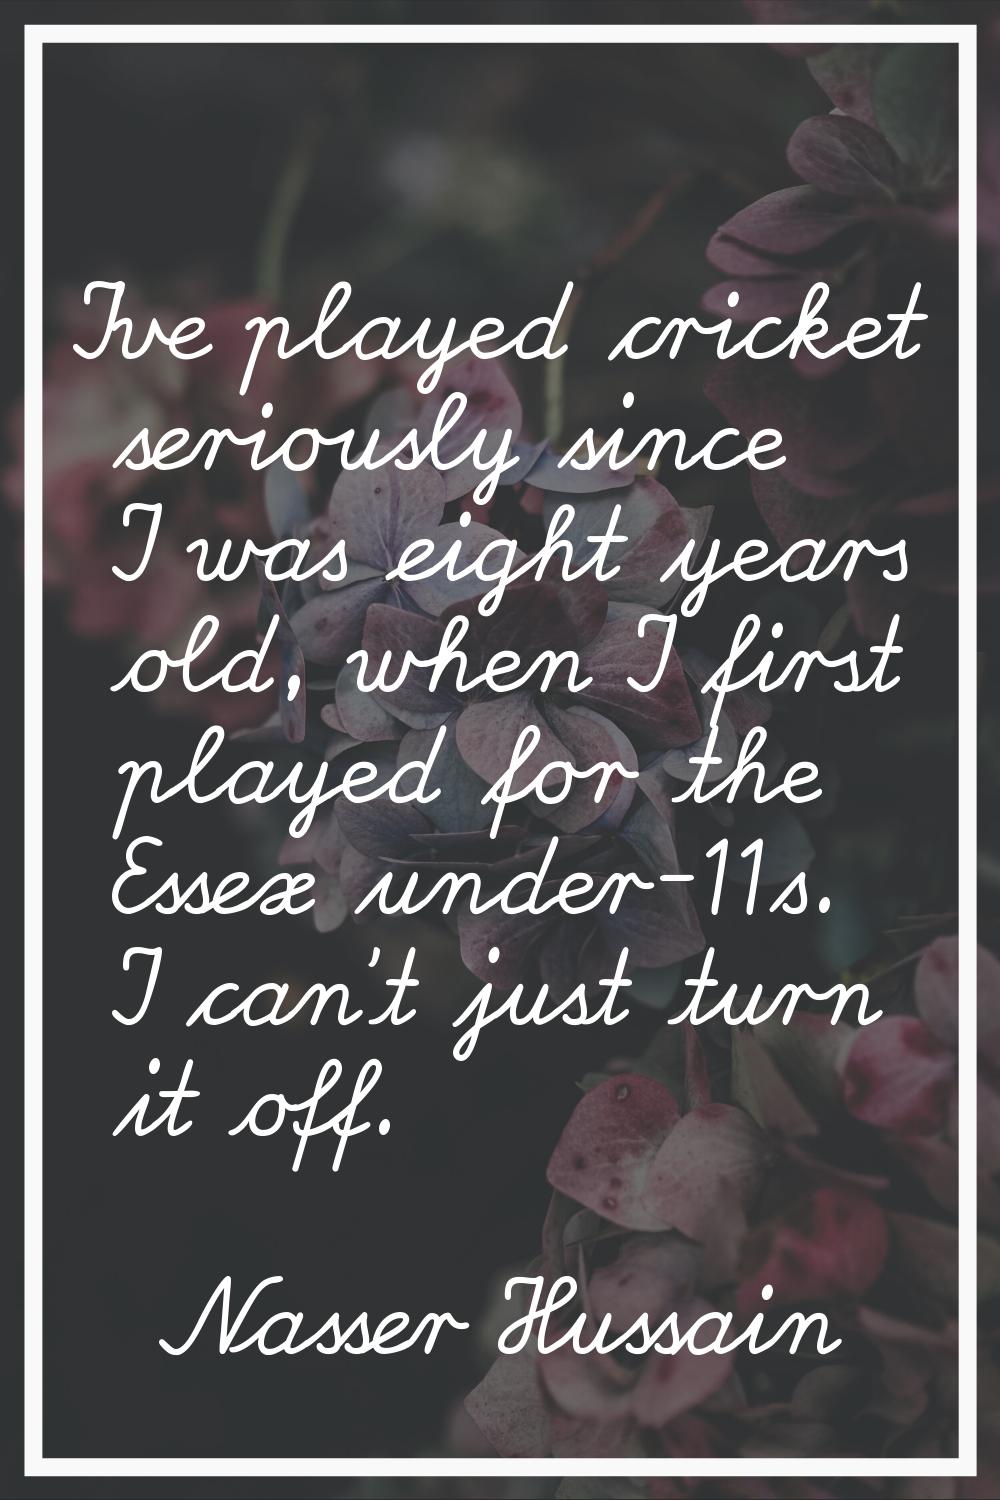 I've played cricket seriously since I was eight years old, when I first played for the Essex under-